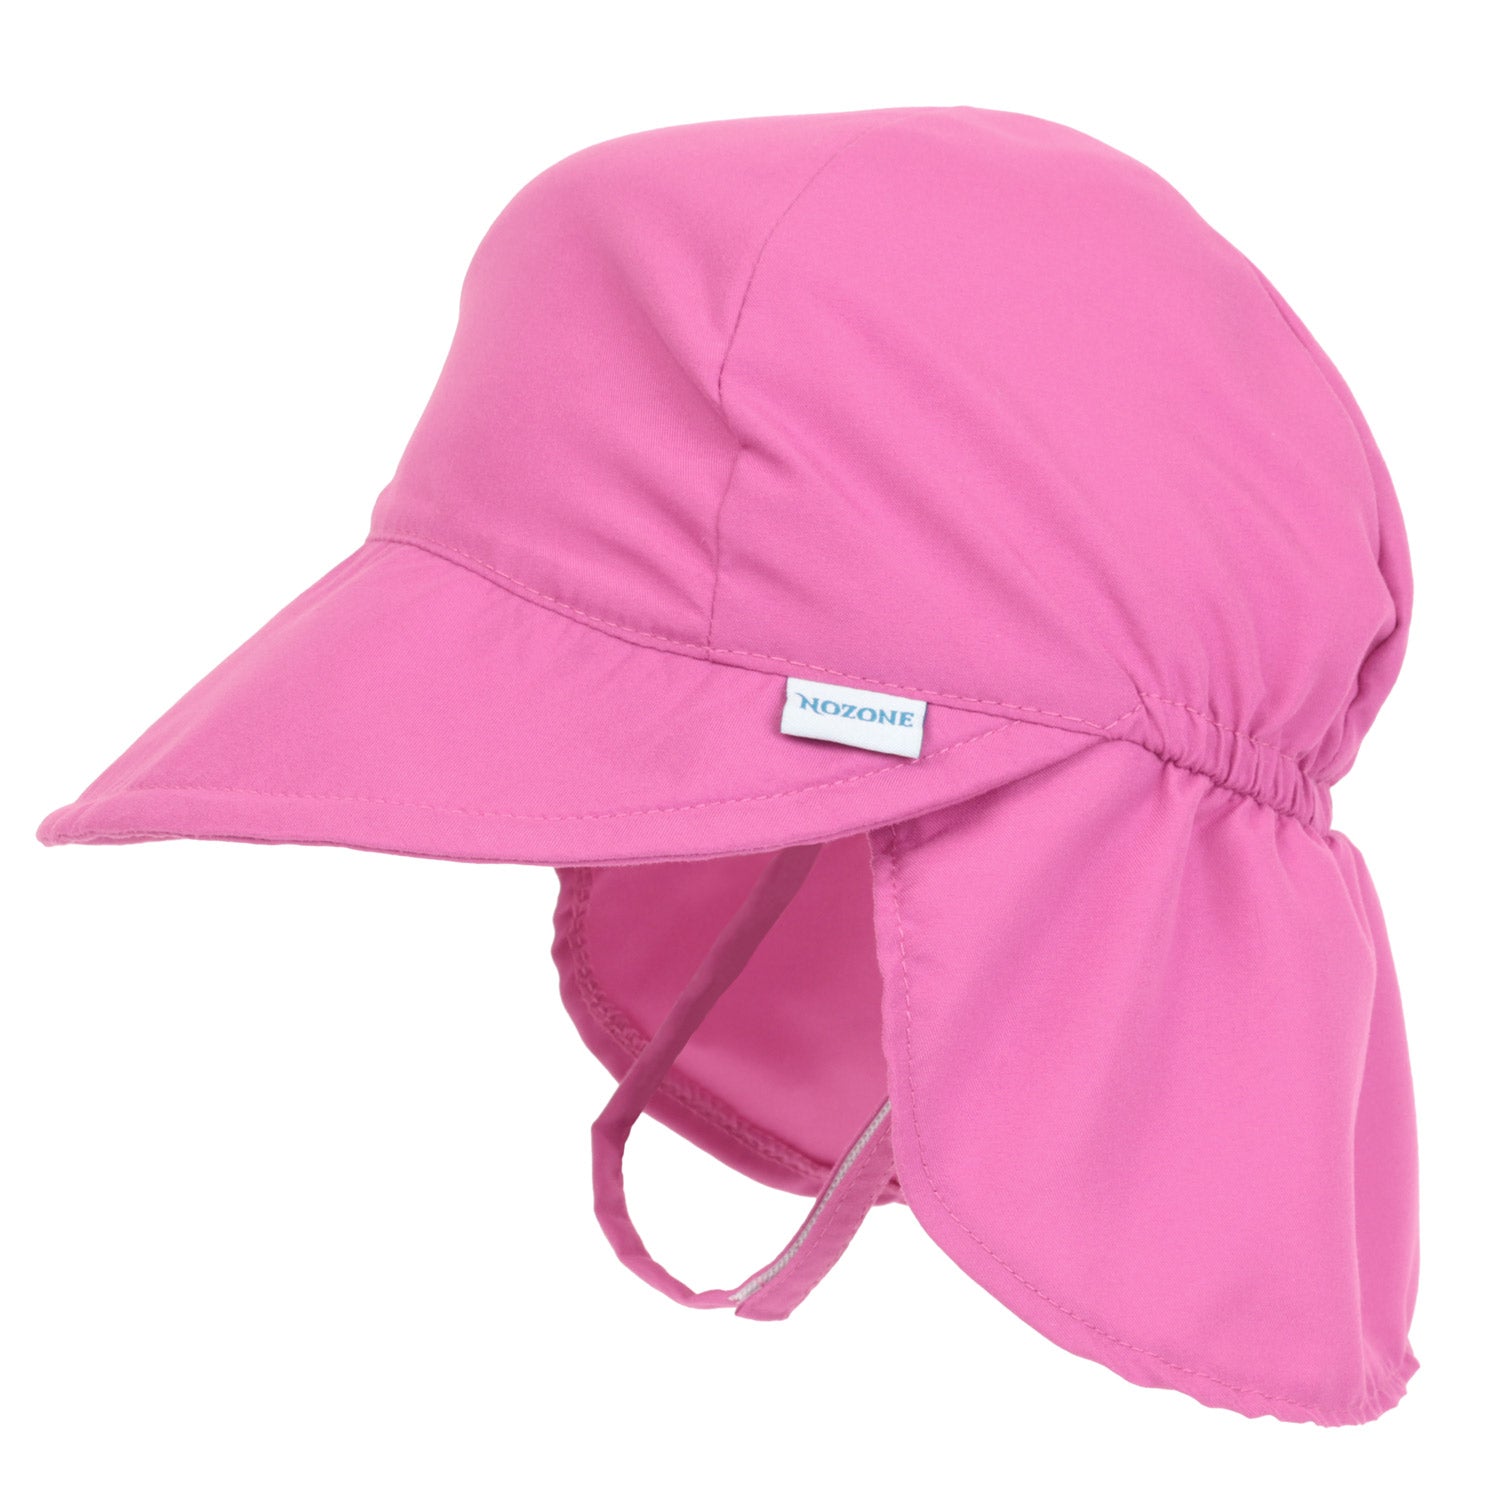 The Better Baby Flap Sun Hat 0-6 Months / Pink